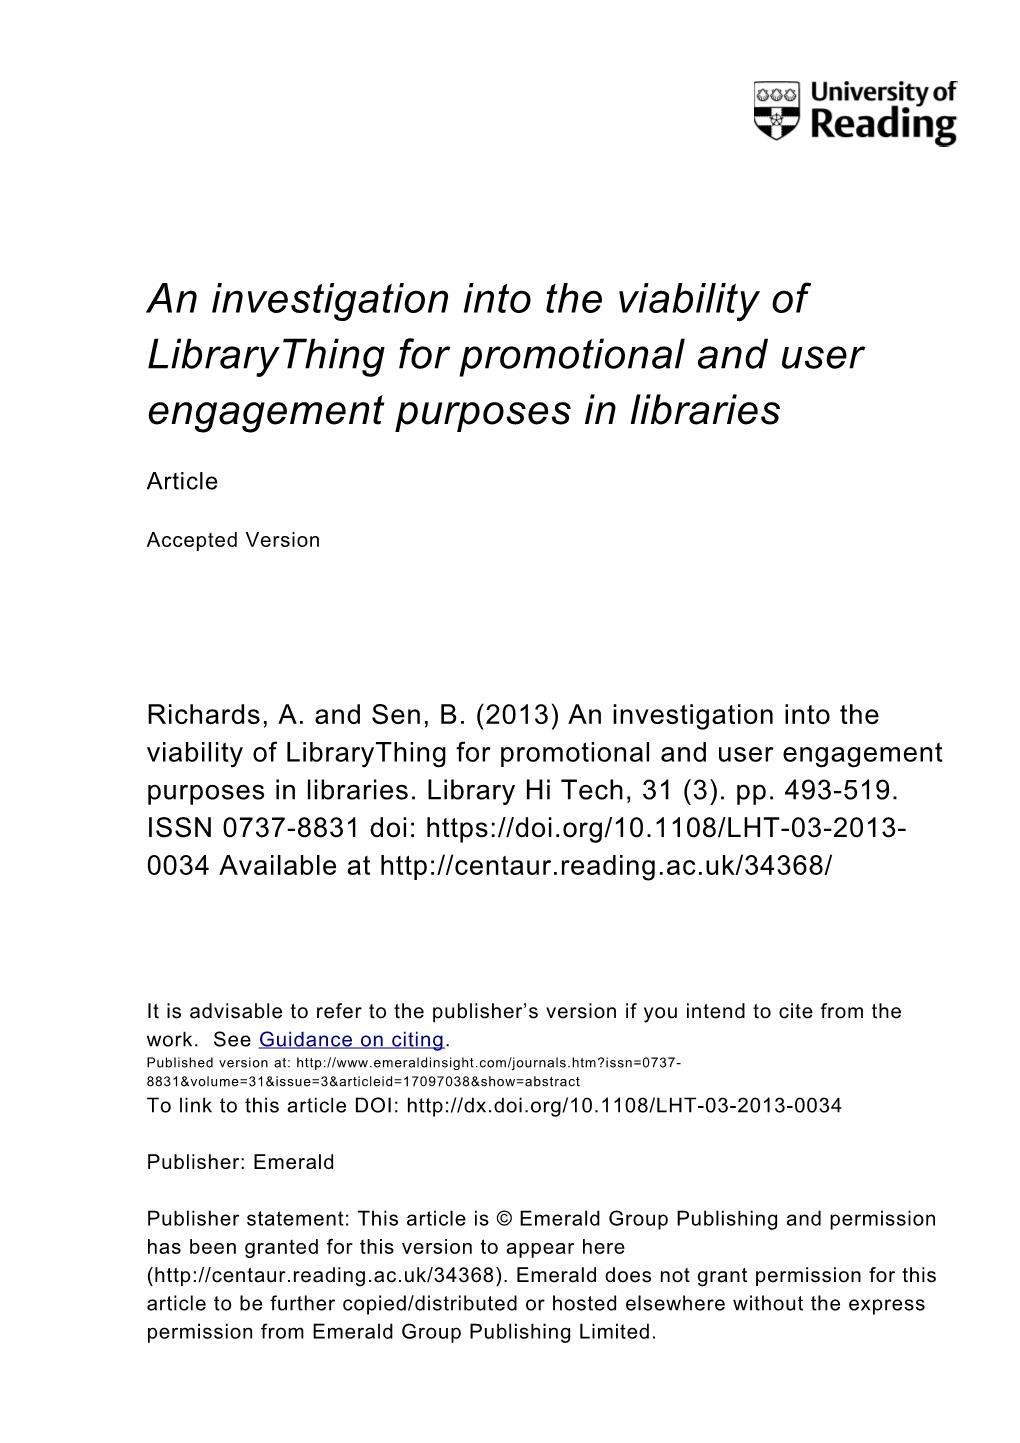 An Investigation Into the Viability of Librarything for Promotional and User Engagement Purposes in Libraries